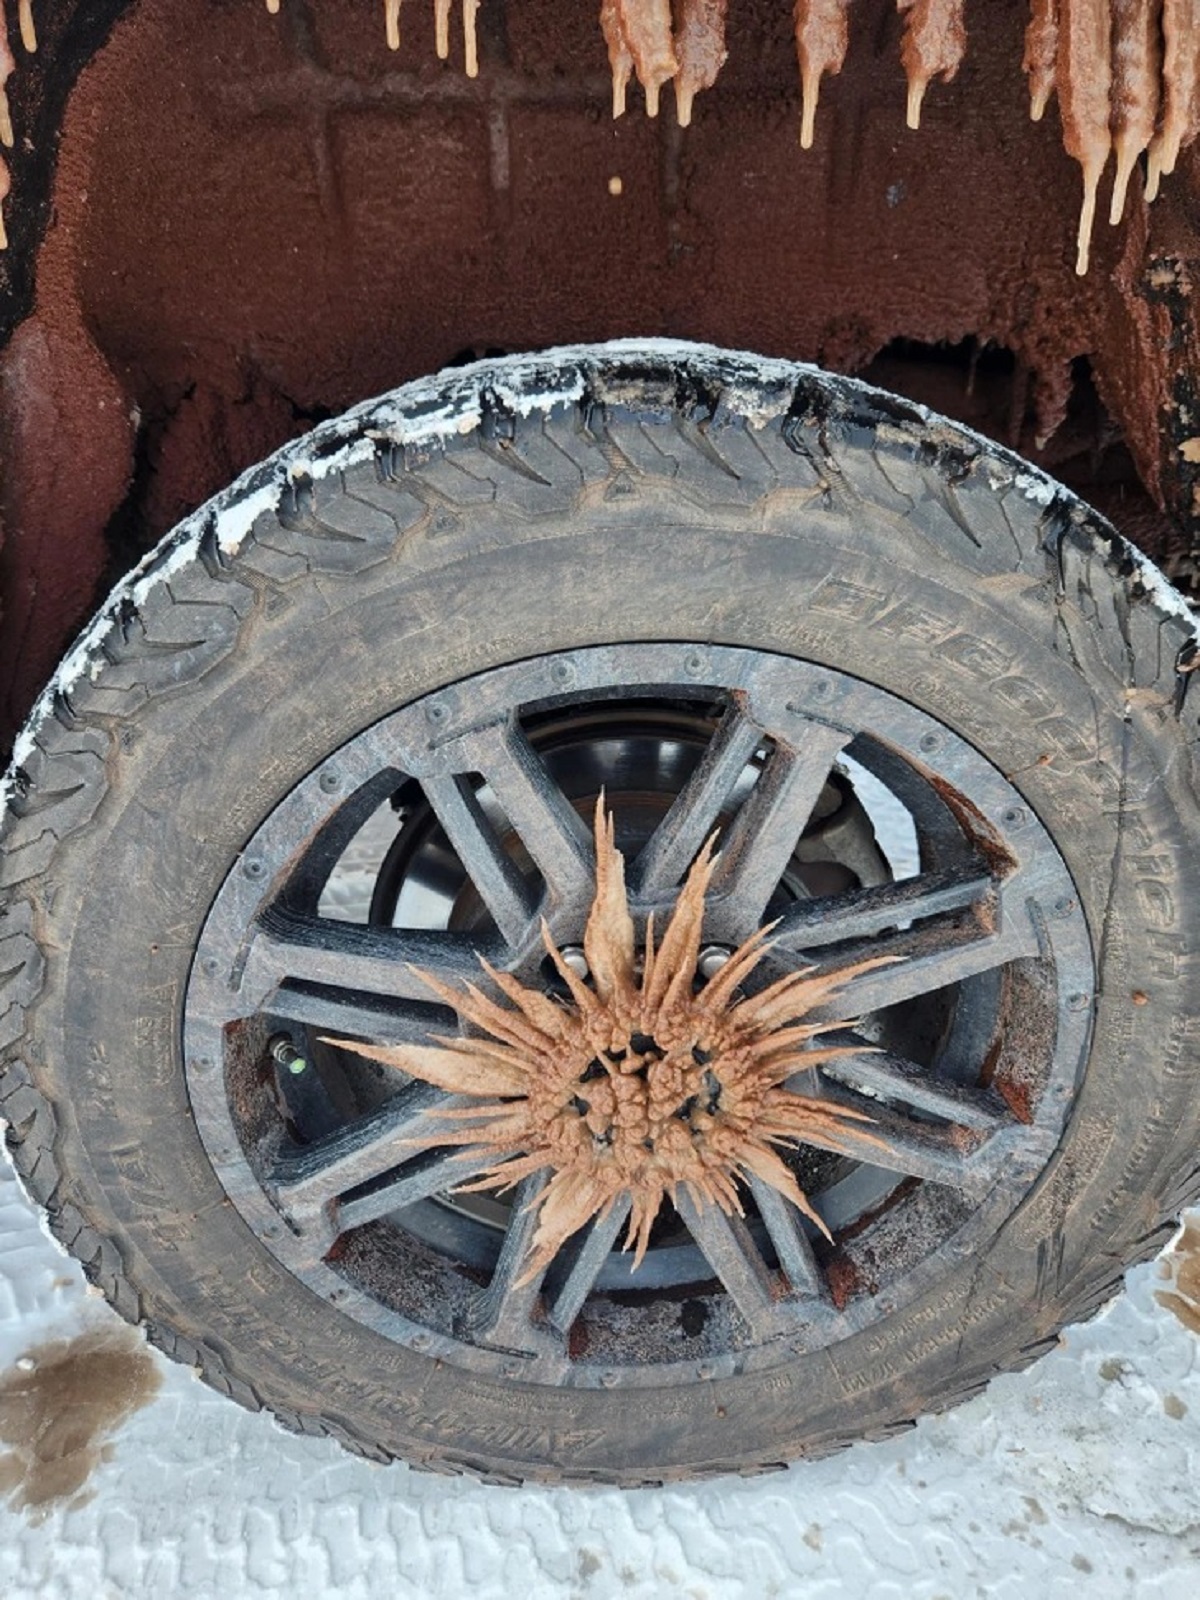 “My tire after driving 5 hours on icy roads through New Mexico”